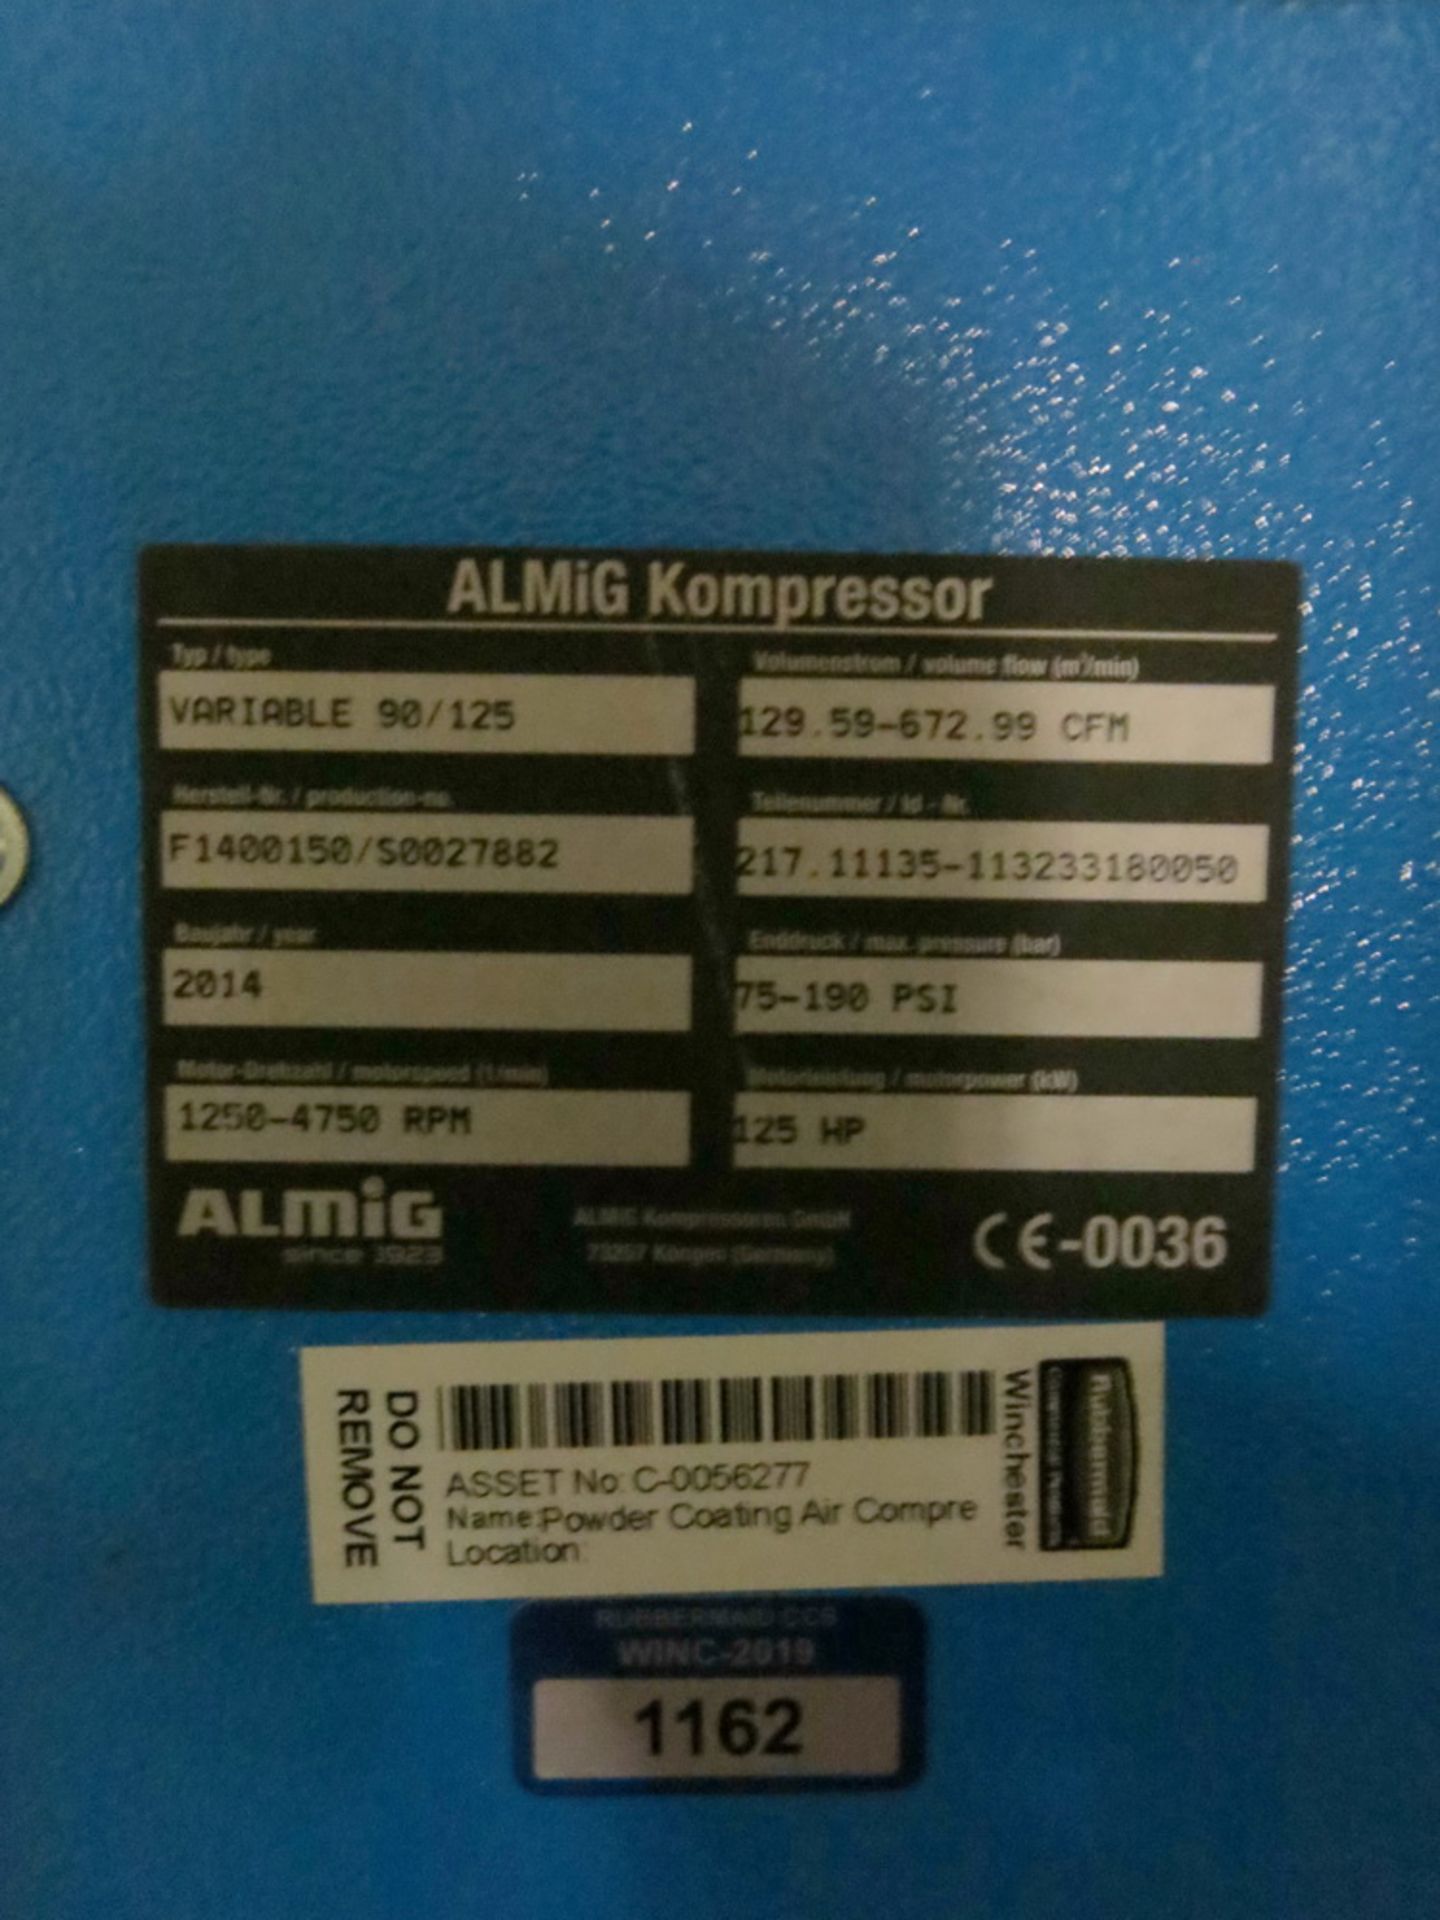 2014 Almig Variable Speed Rotary Screw Air Compressor Model 90/125 - Image 4 of 4